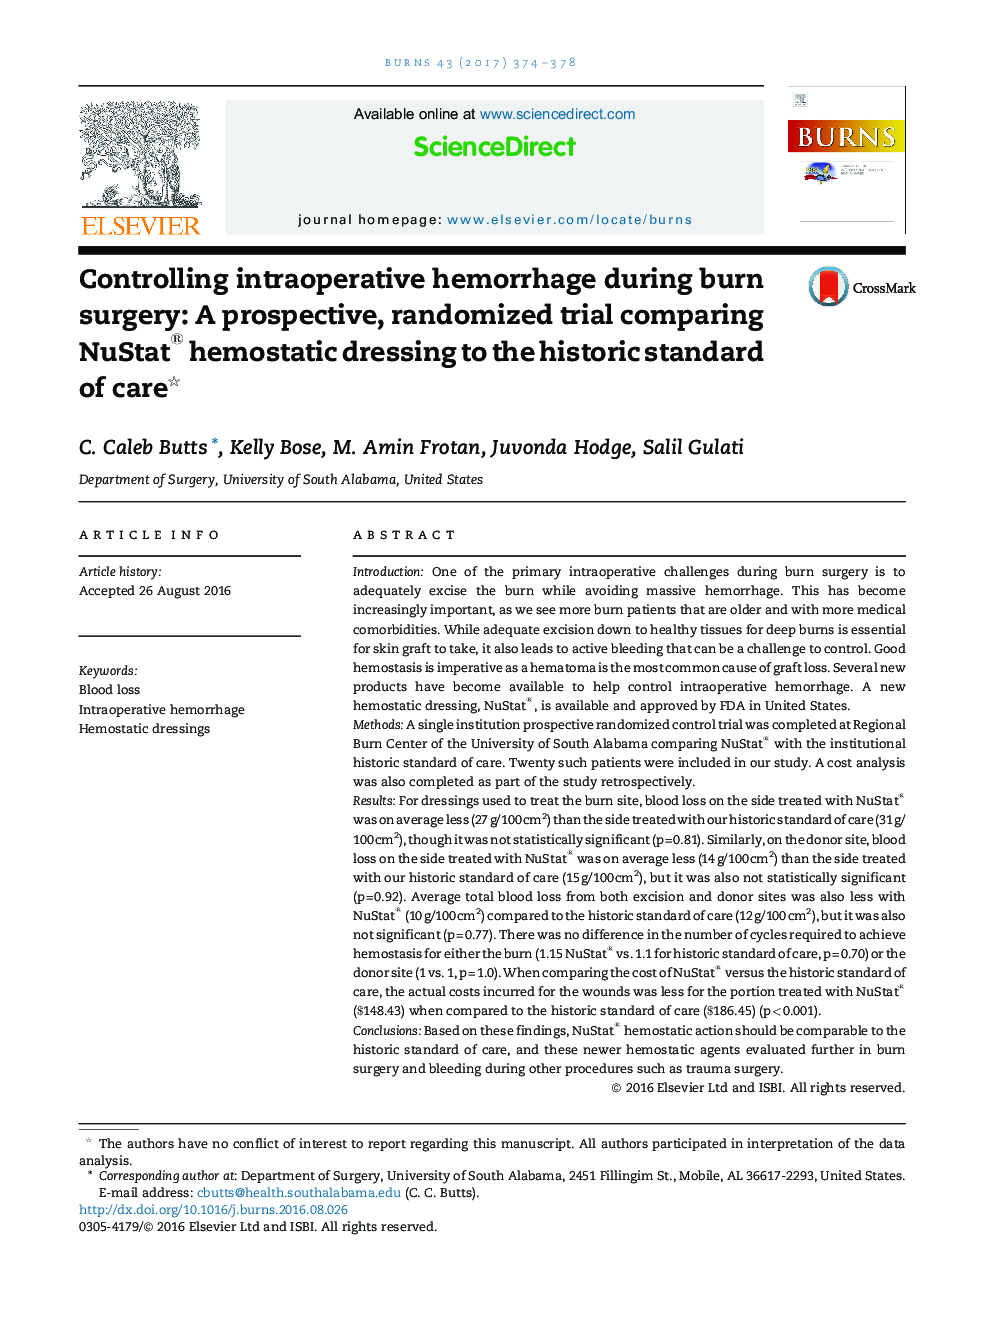 Controlling intraoperative hemorrhage during burn surgery: A prospective, randomized trial comparing NuStat® hemostatic dressing to the historic standard of care